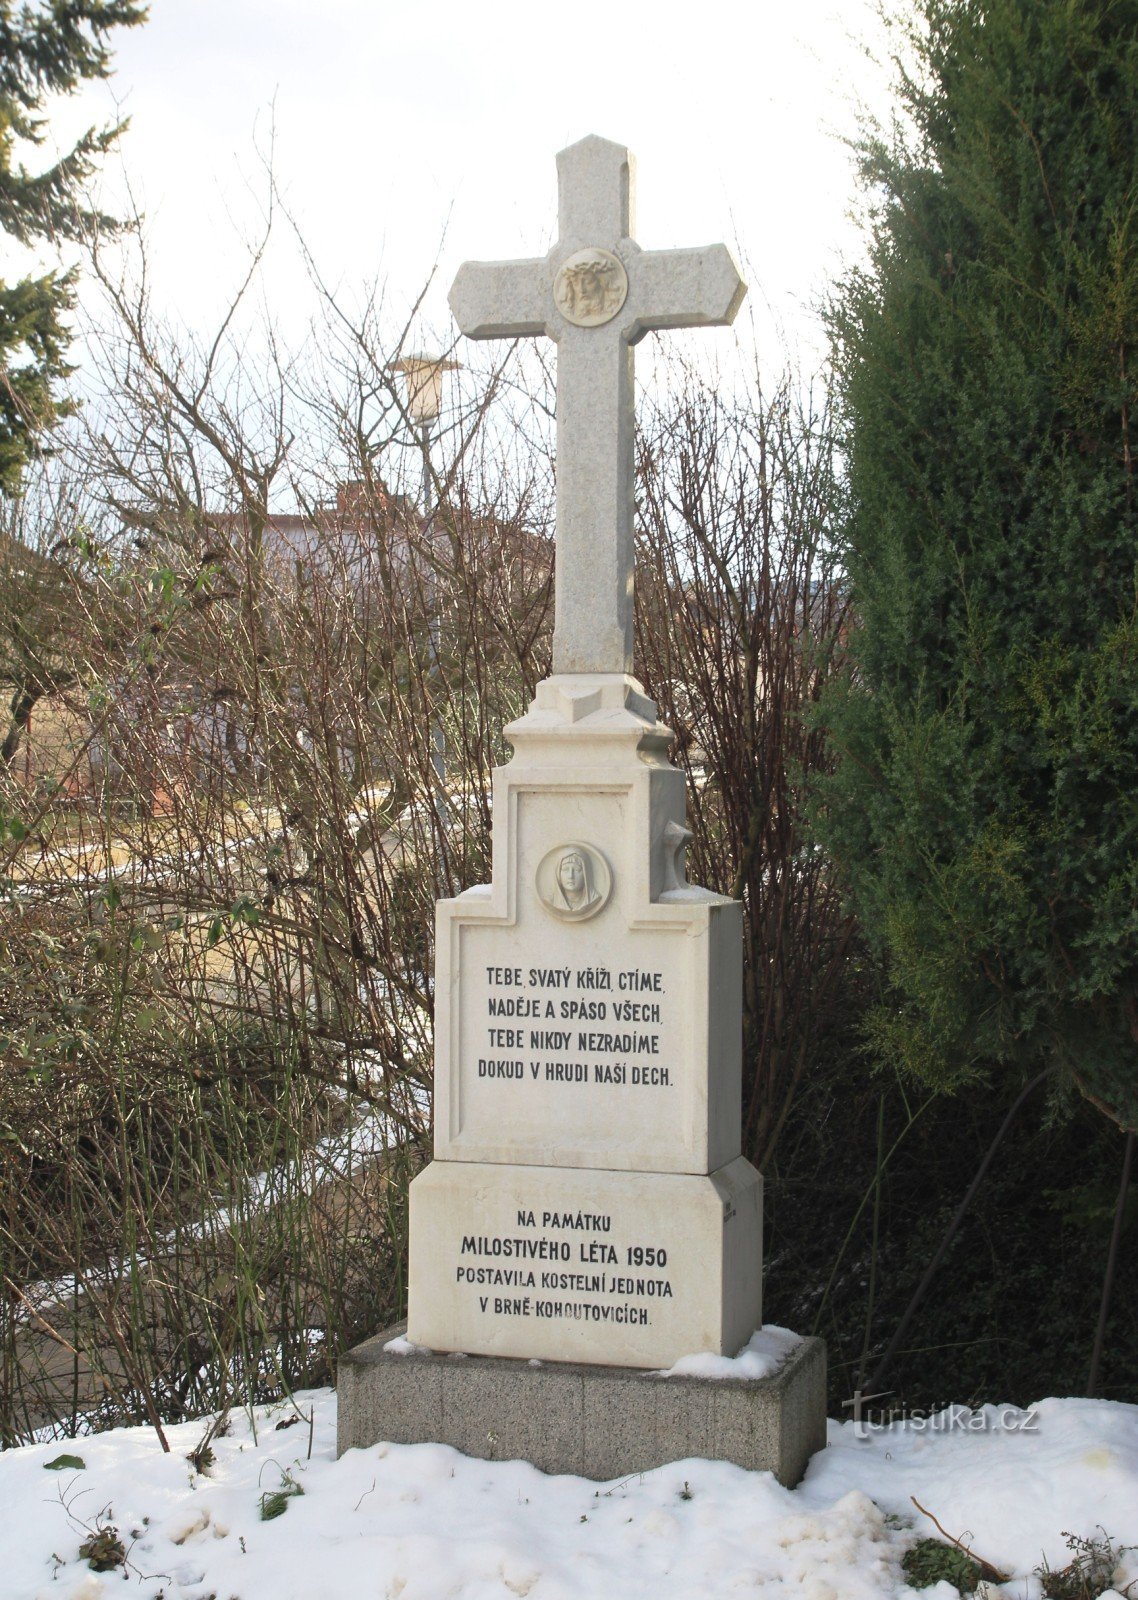 Marble cross by the chapel from 1950